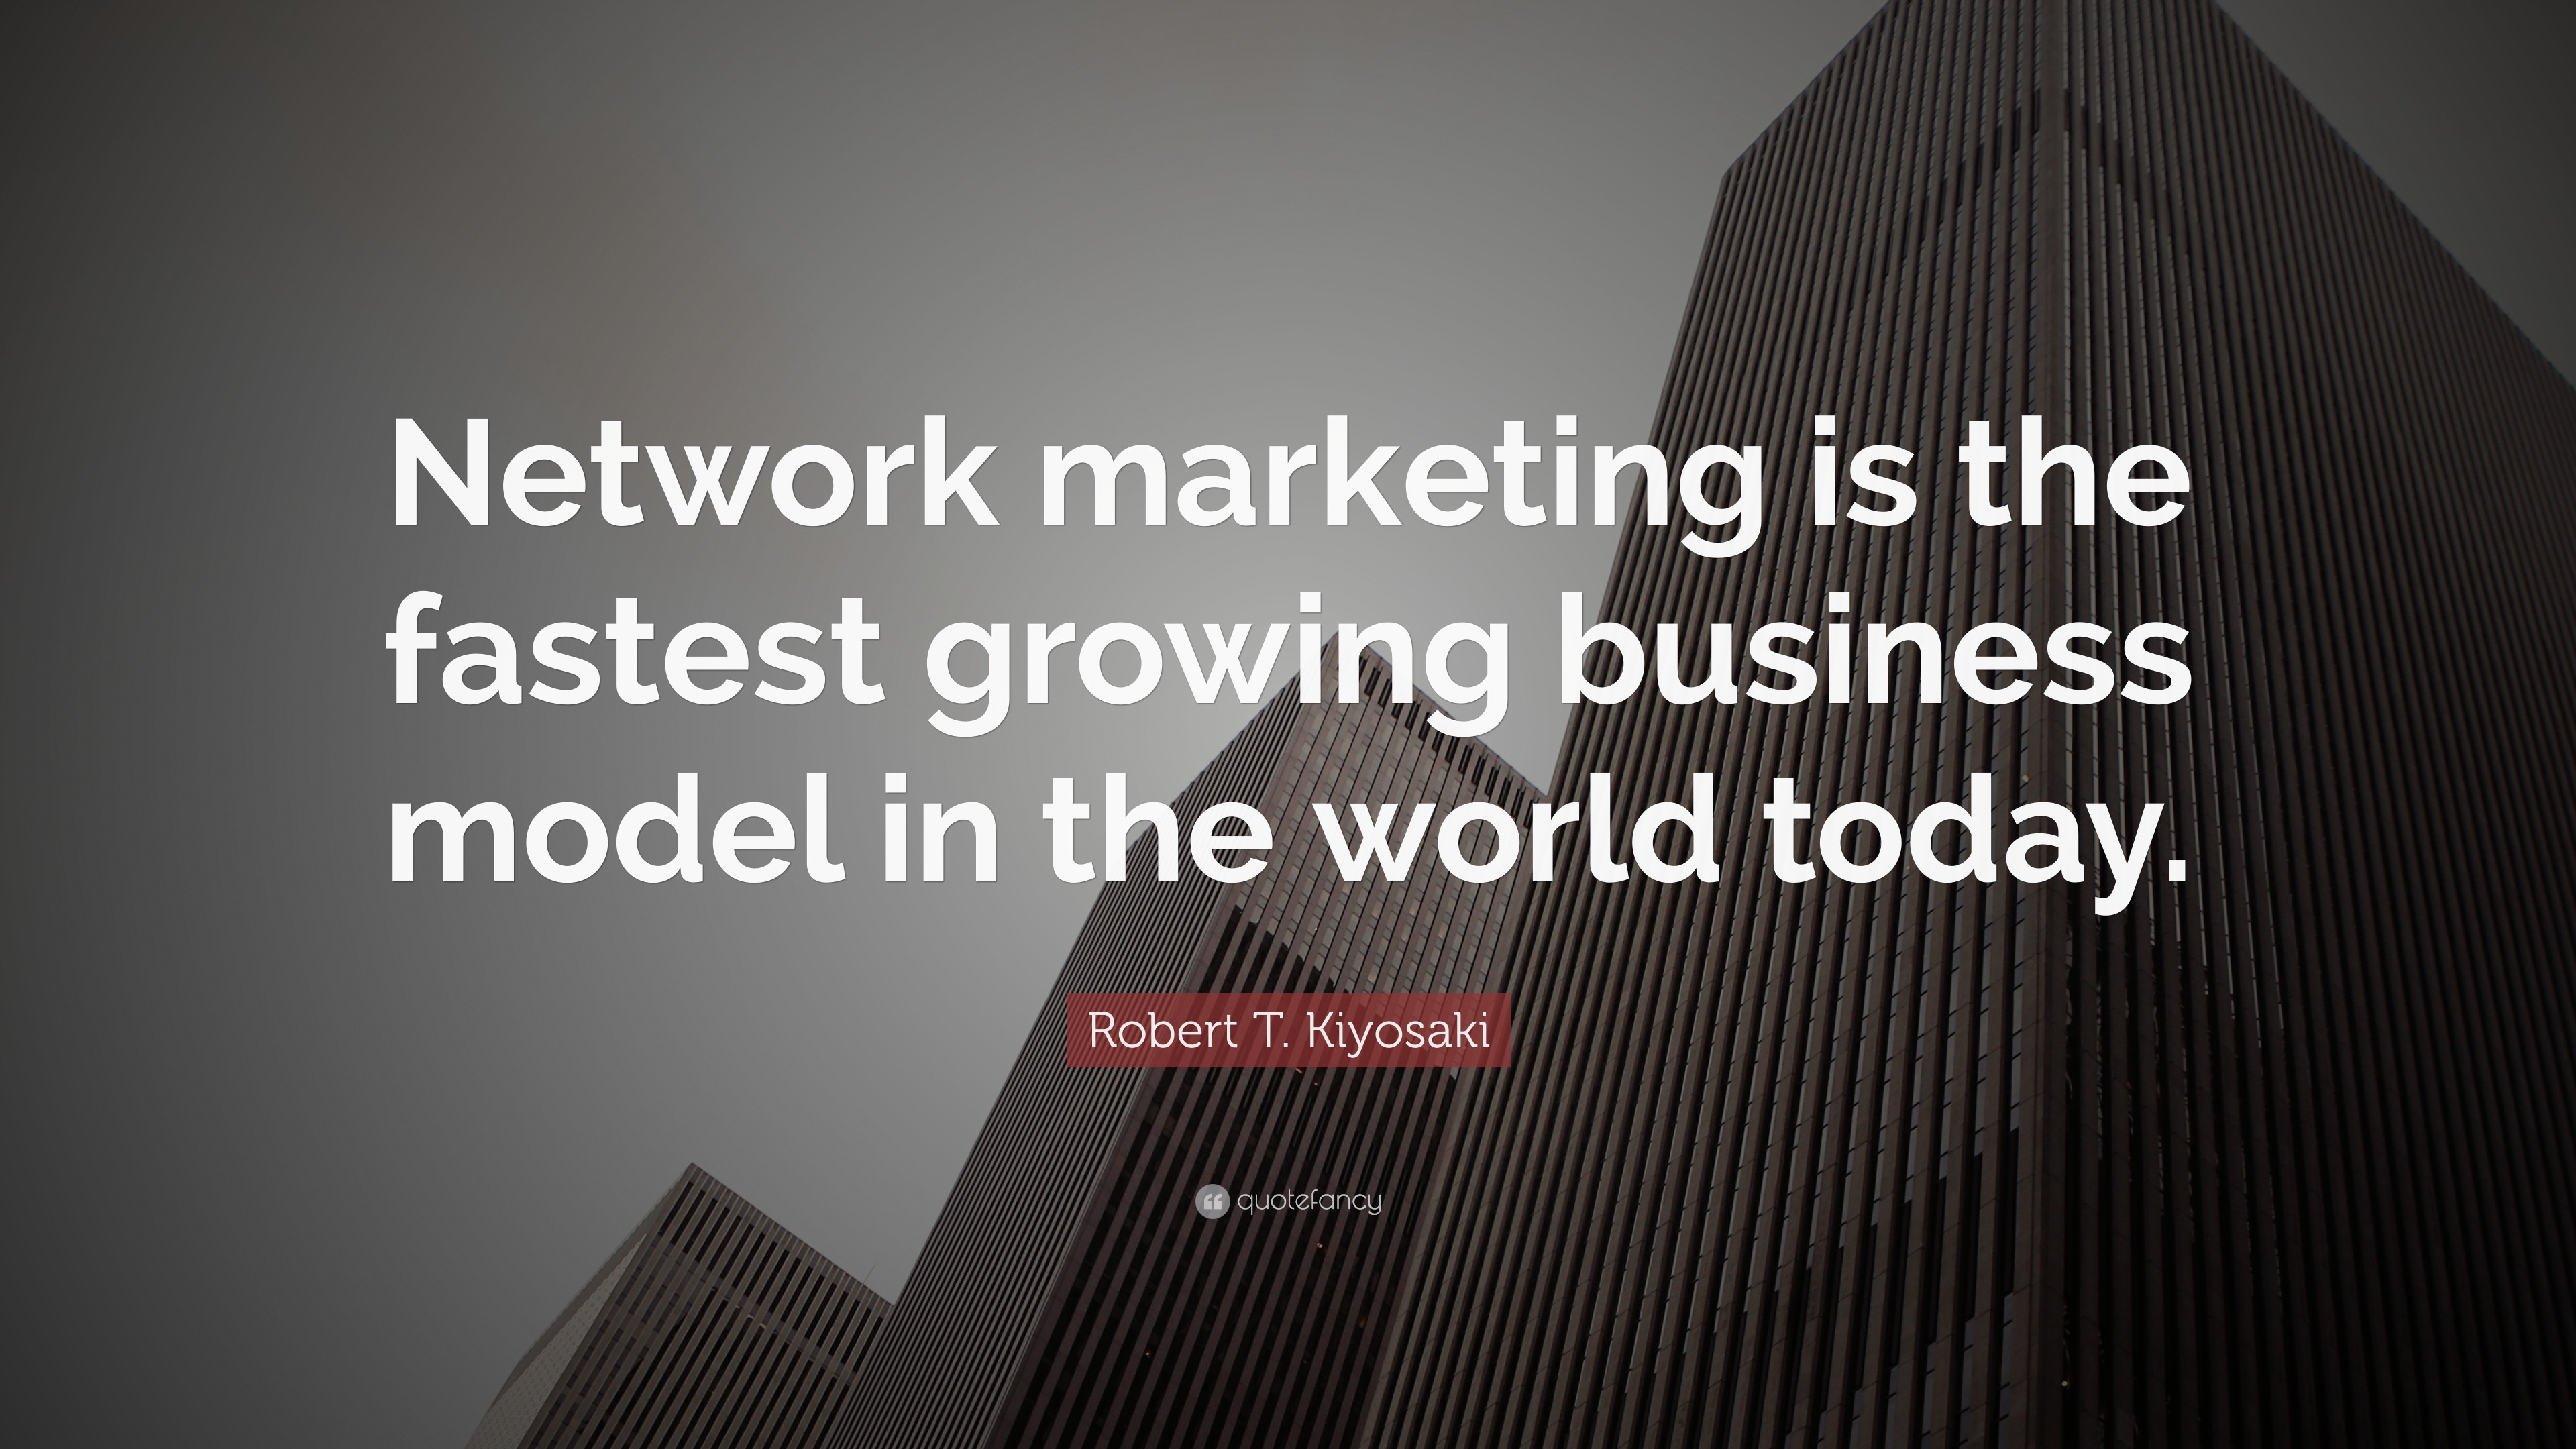 3840x2160 Robert T. Kiyosaki Quote: “Network marketing is the fastest growing  business model in